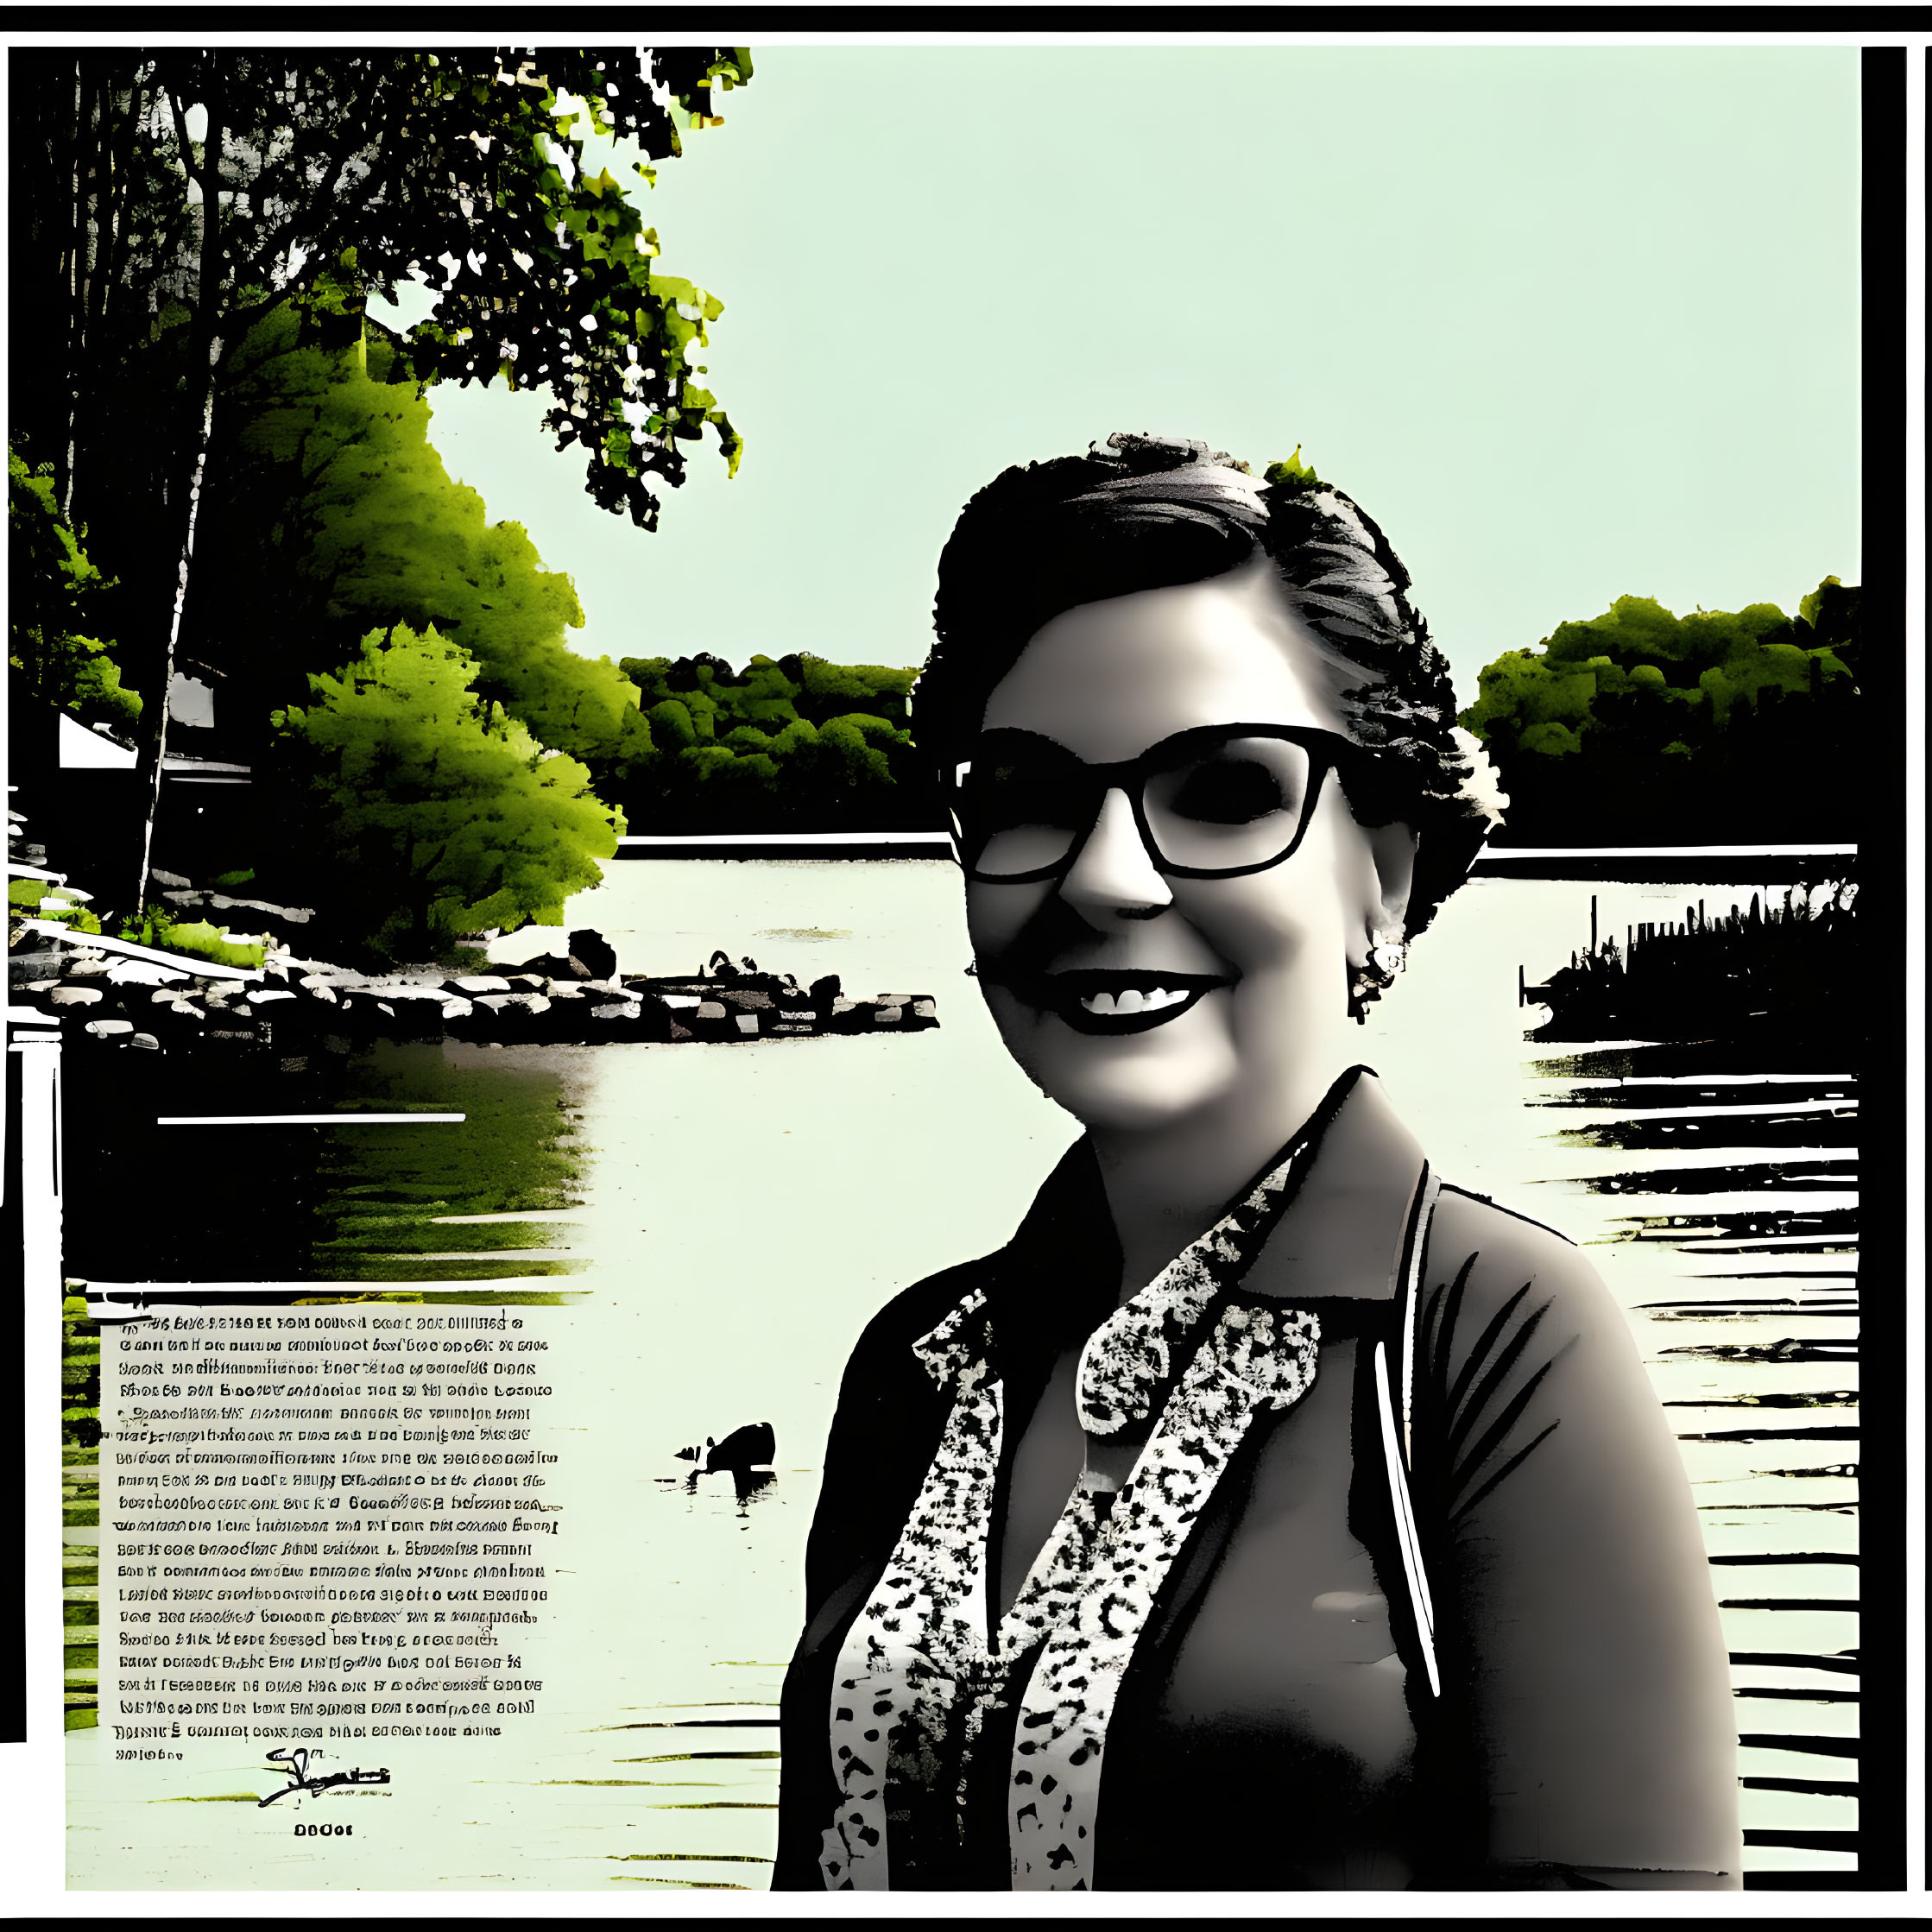 Smiling woman with glasses by serene lake and ducks